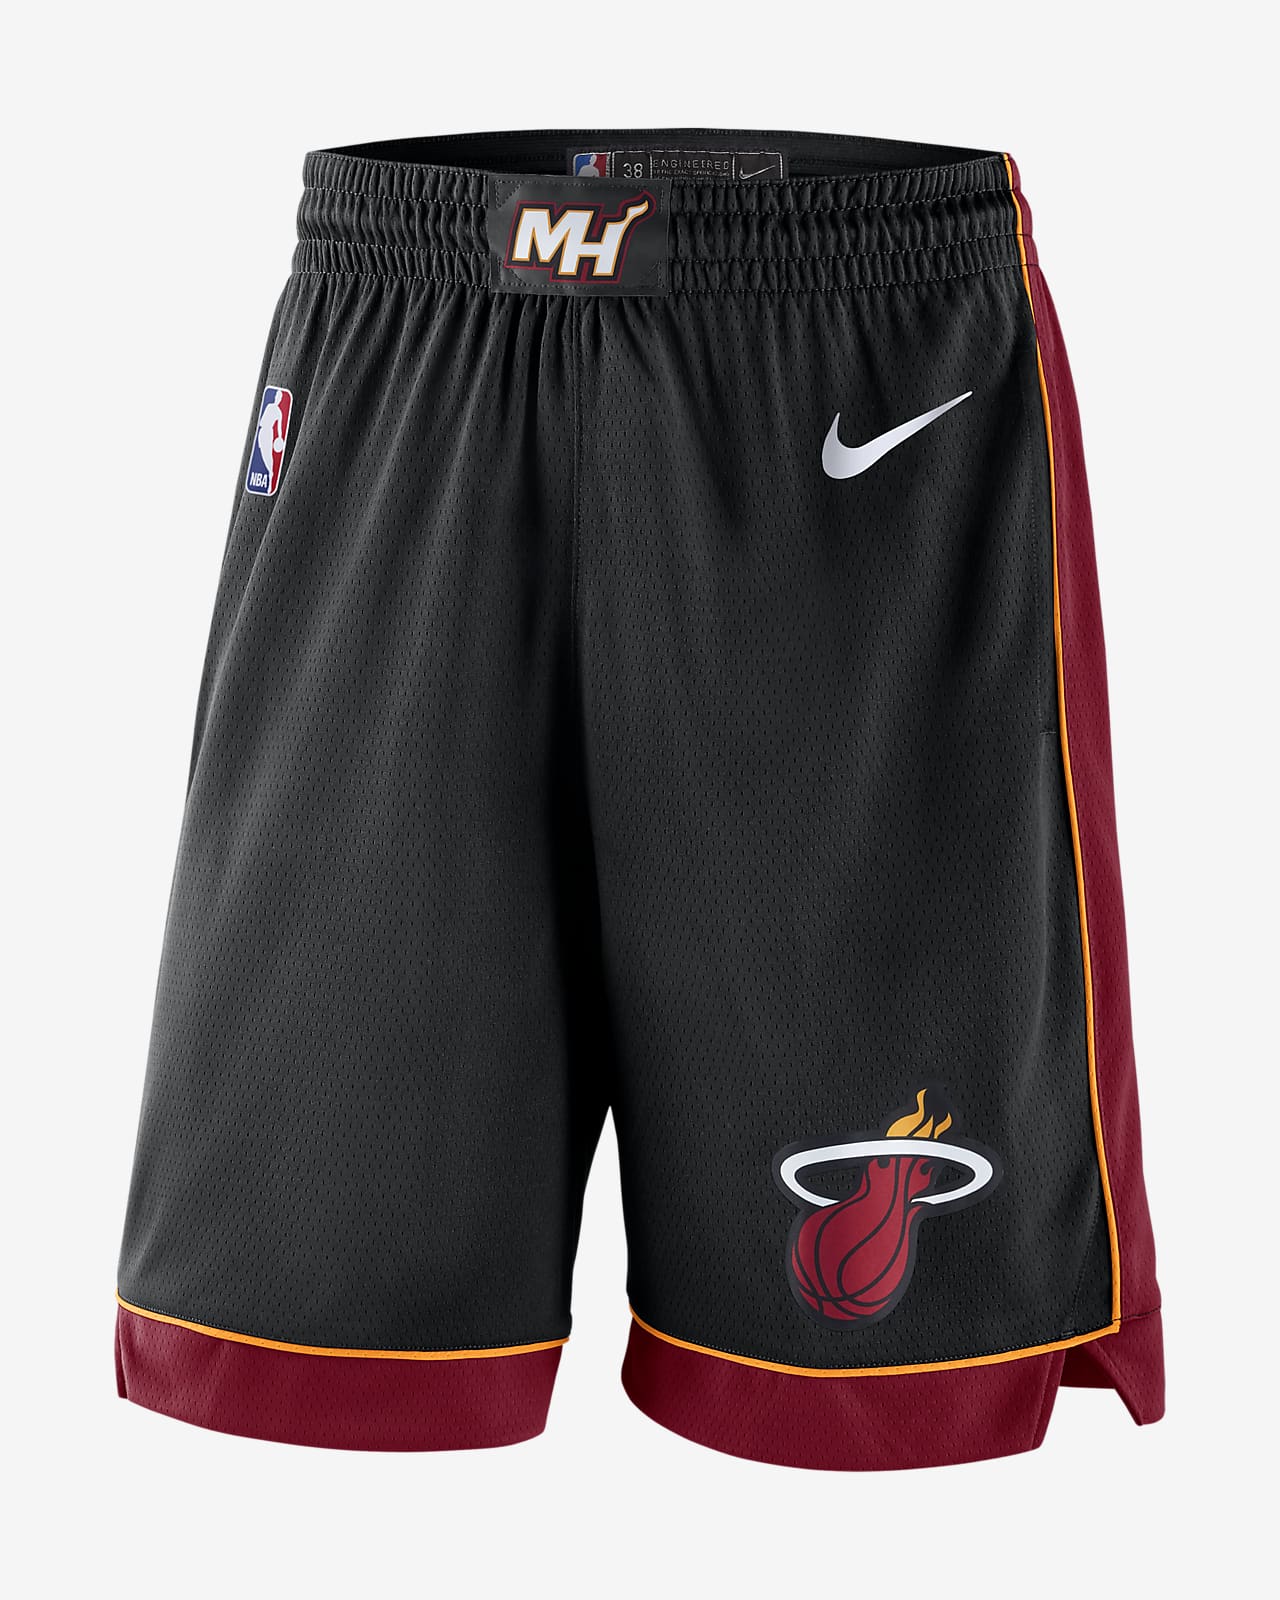 Everyday Wear S-XXL G&F Miami Heat Black City Edition Breathable And Wearable Swingman Basketball Fans Supporter Training Shorts Size : S 